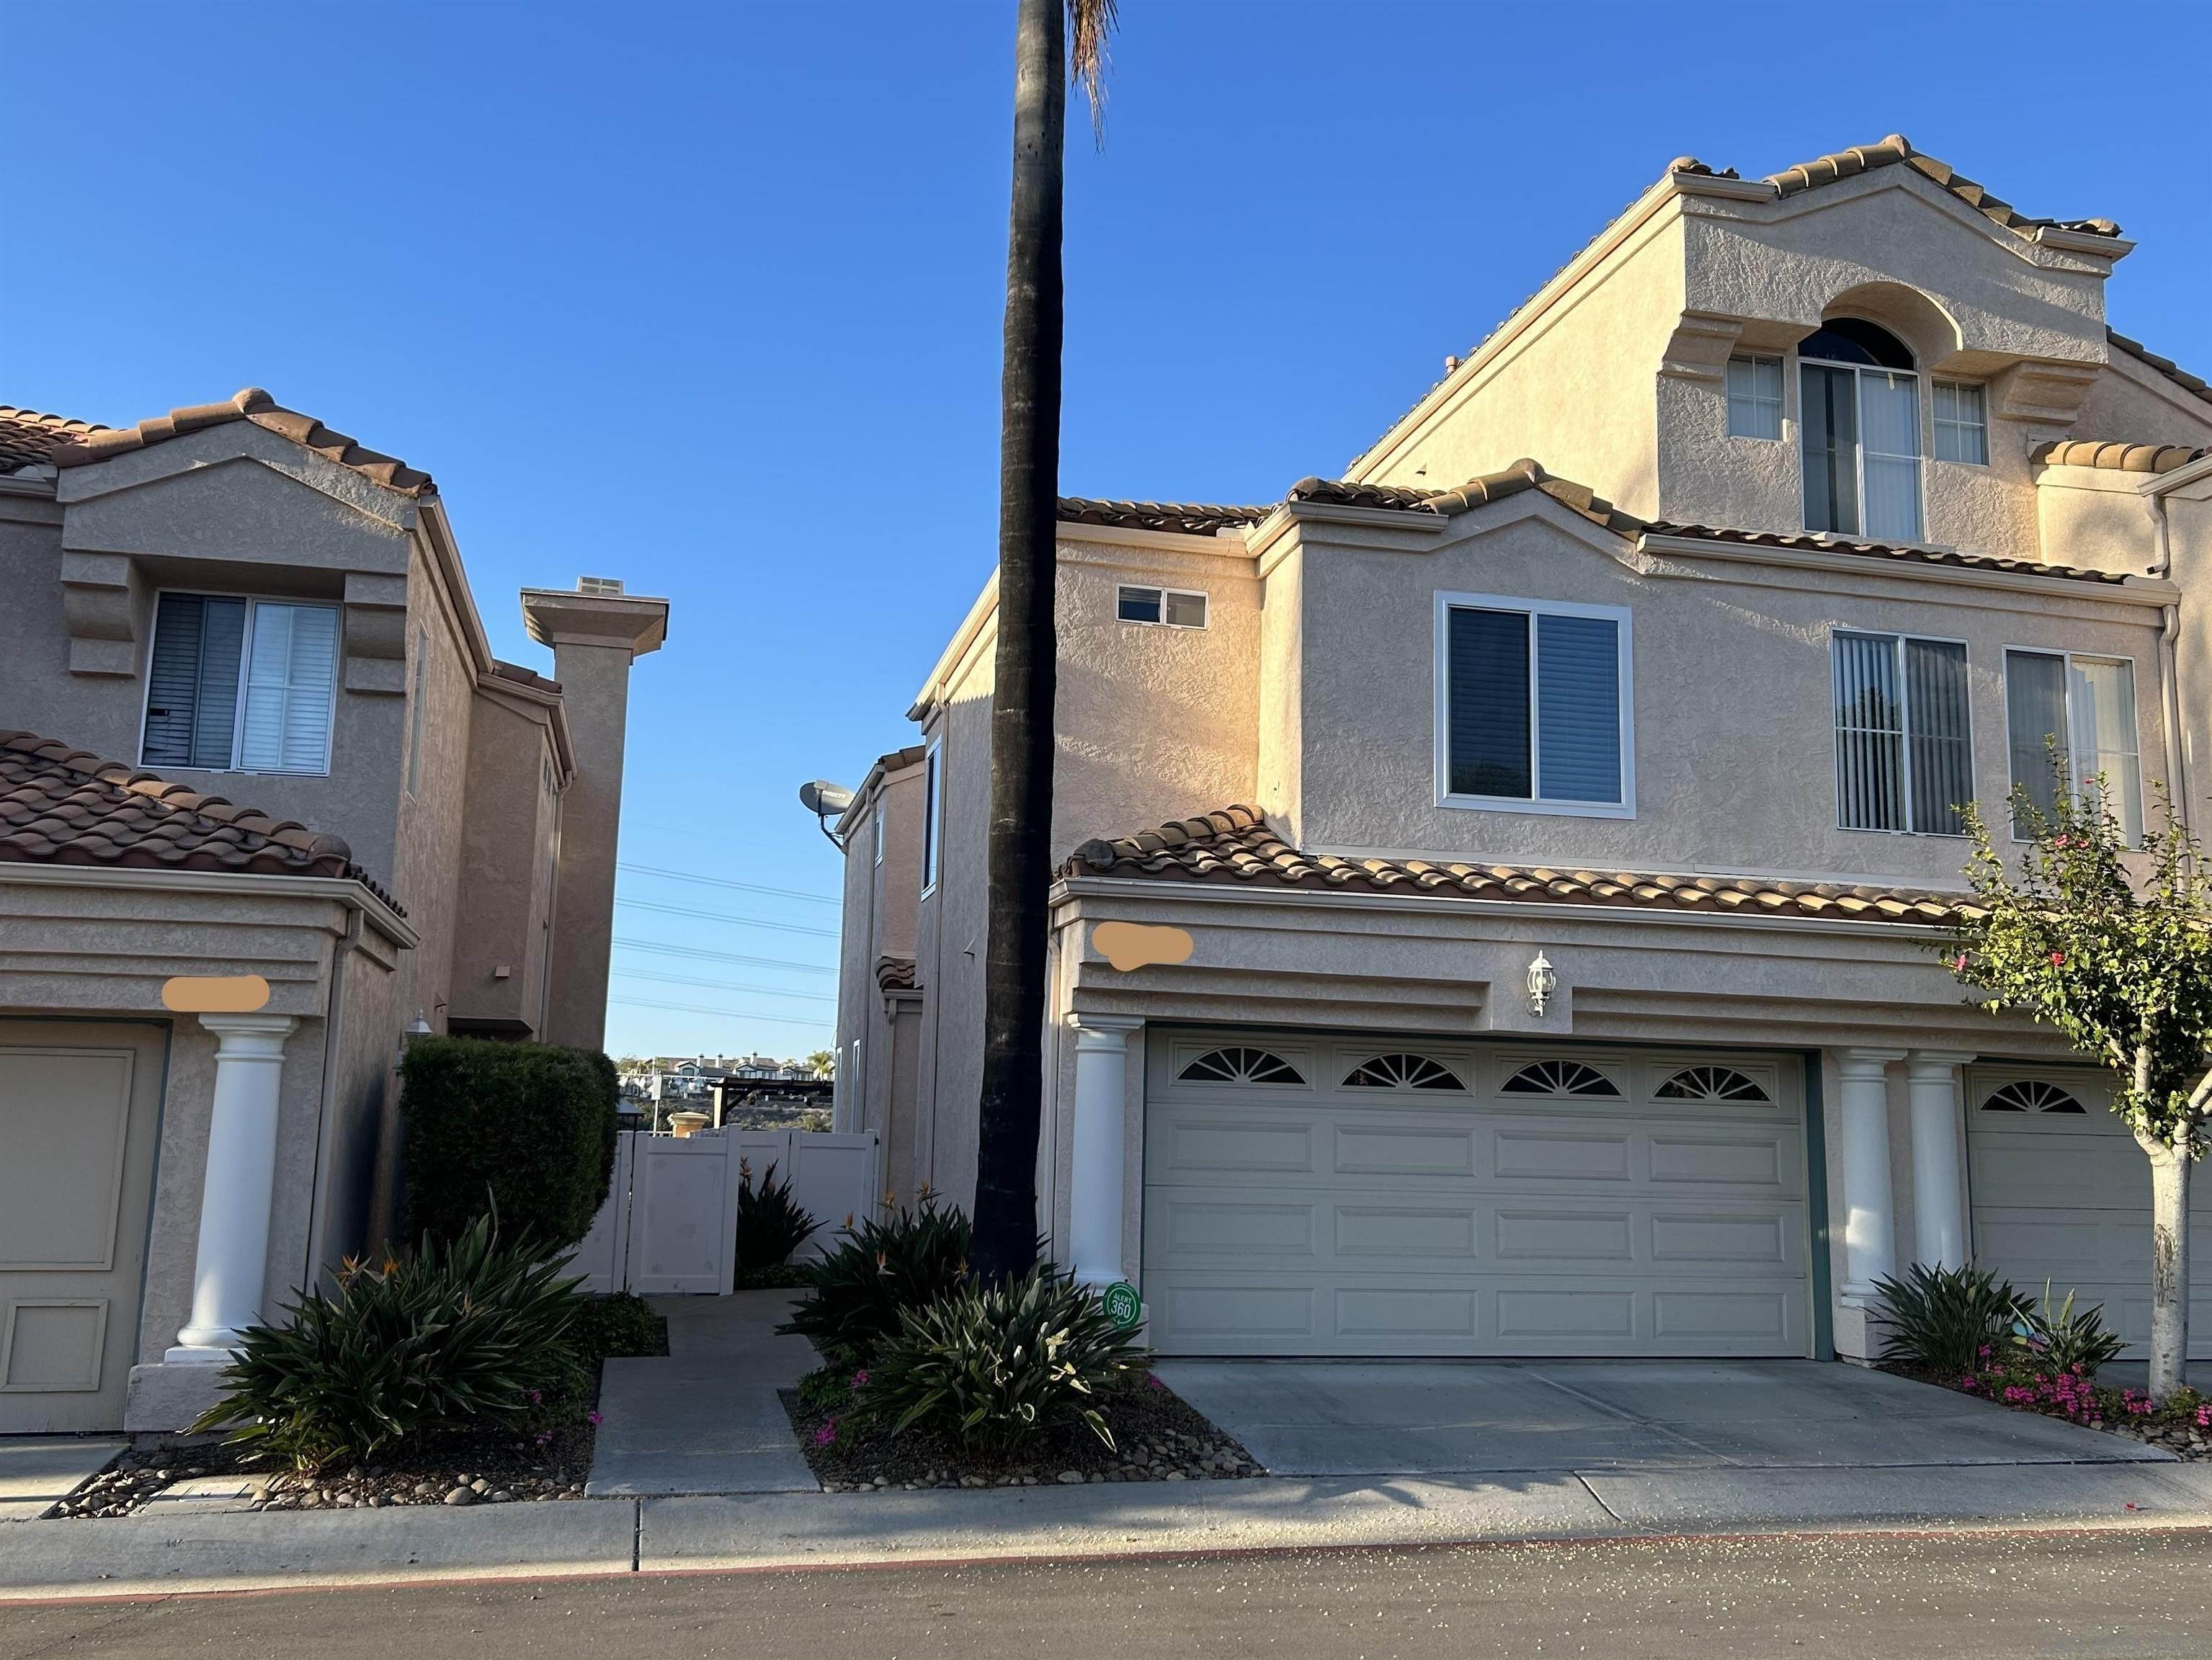 1. Townhouse for Sale at Chula Vista, CA 91910